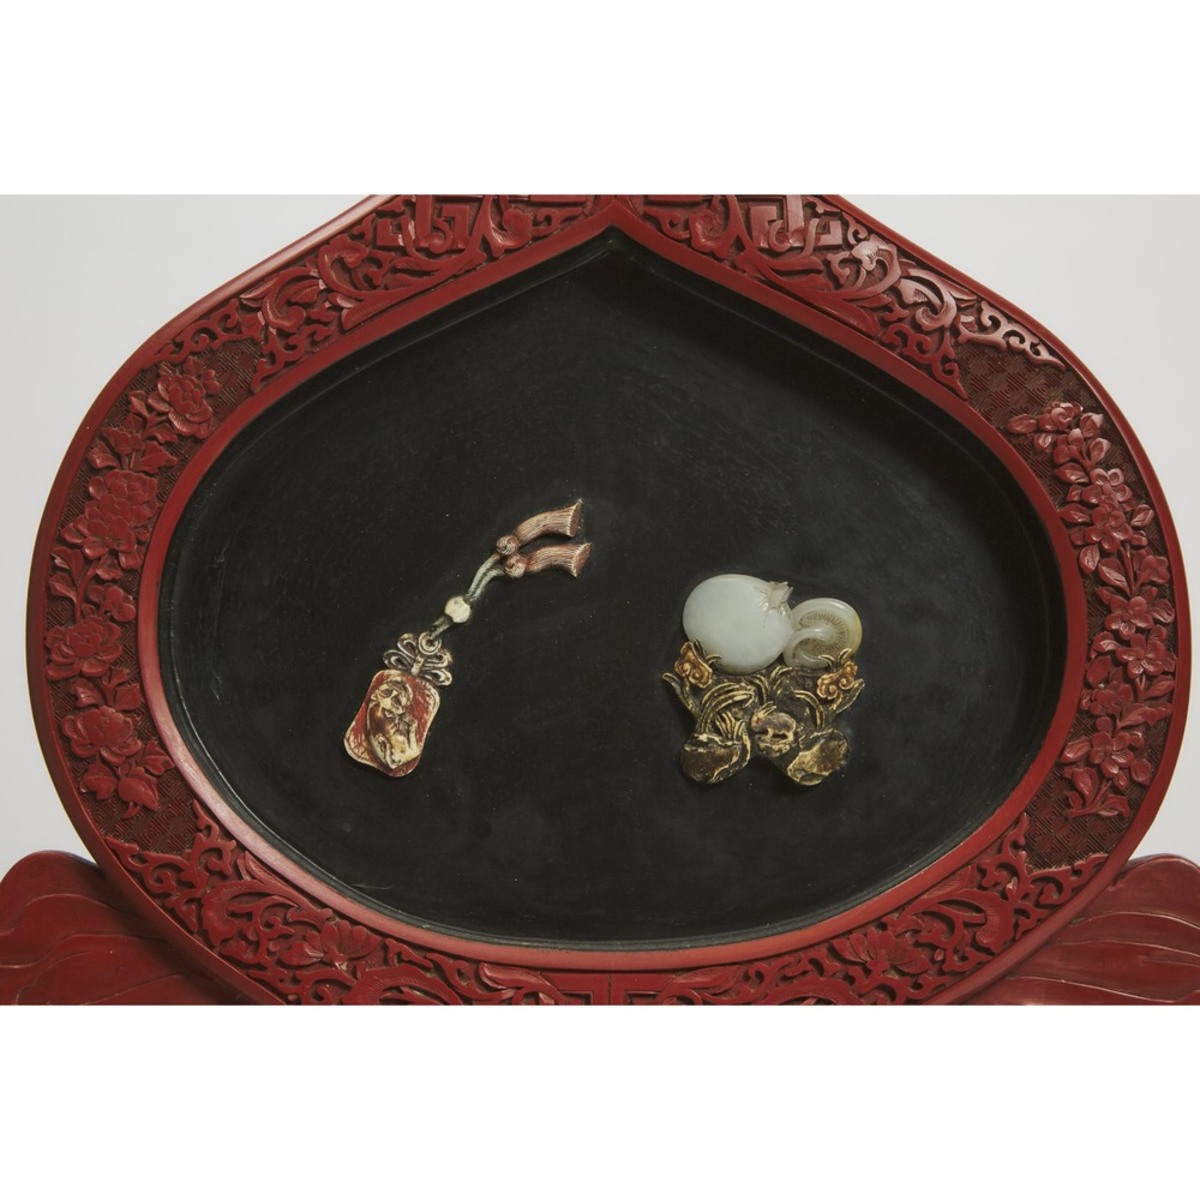 A Pair of Red Lacquer Panels Inlaid With Jade and Precious Stones, 19th Century, 清 十九世纪 剔红嵌宝挂屏一对, he - Image 3 of 6